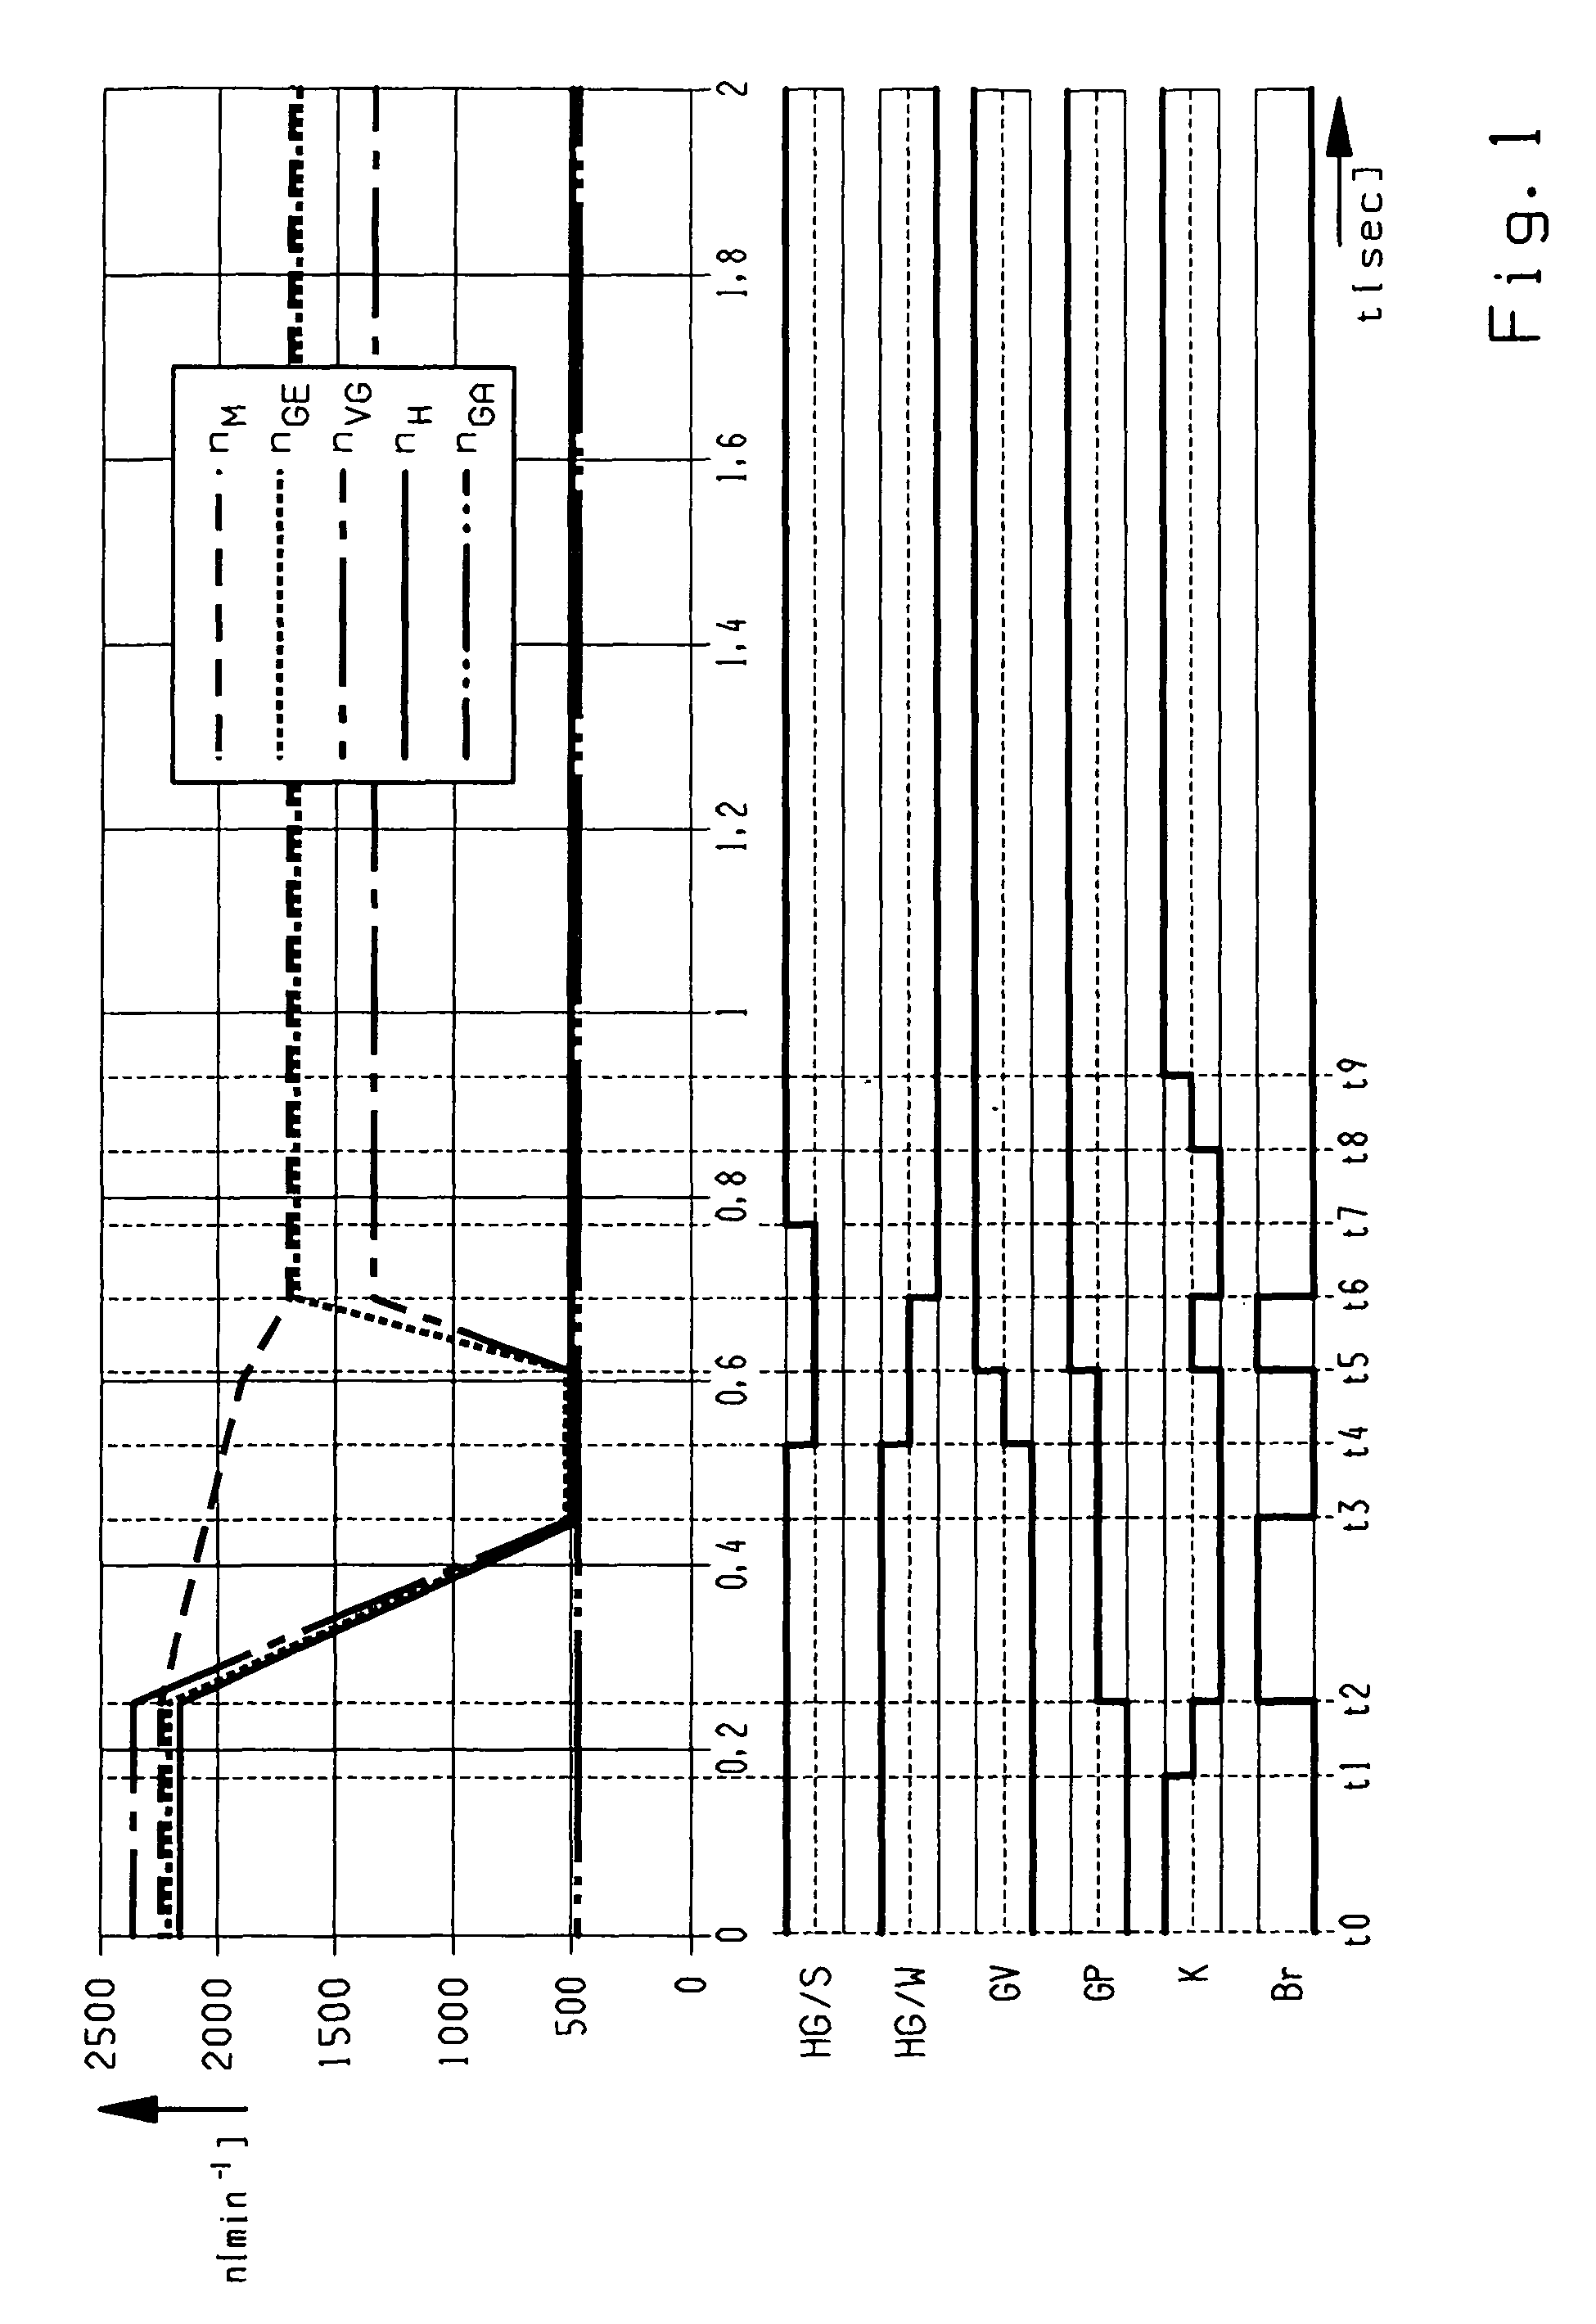 Method for shifting actuation of an automated transmission